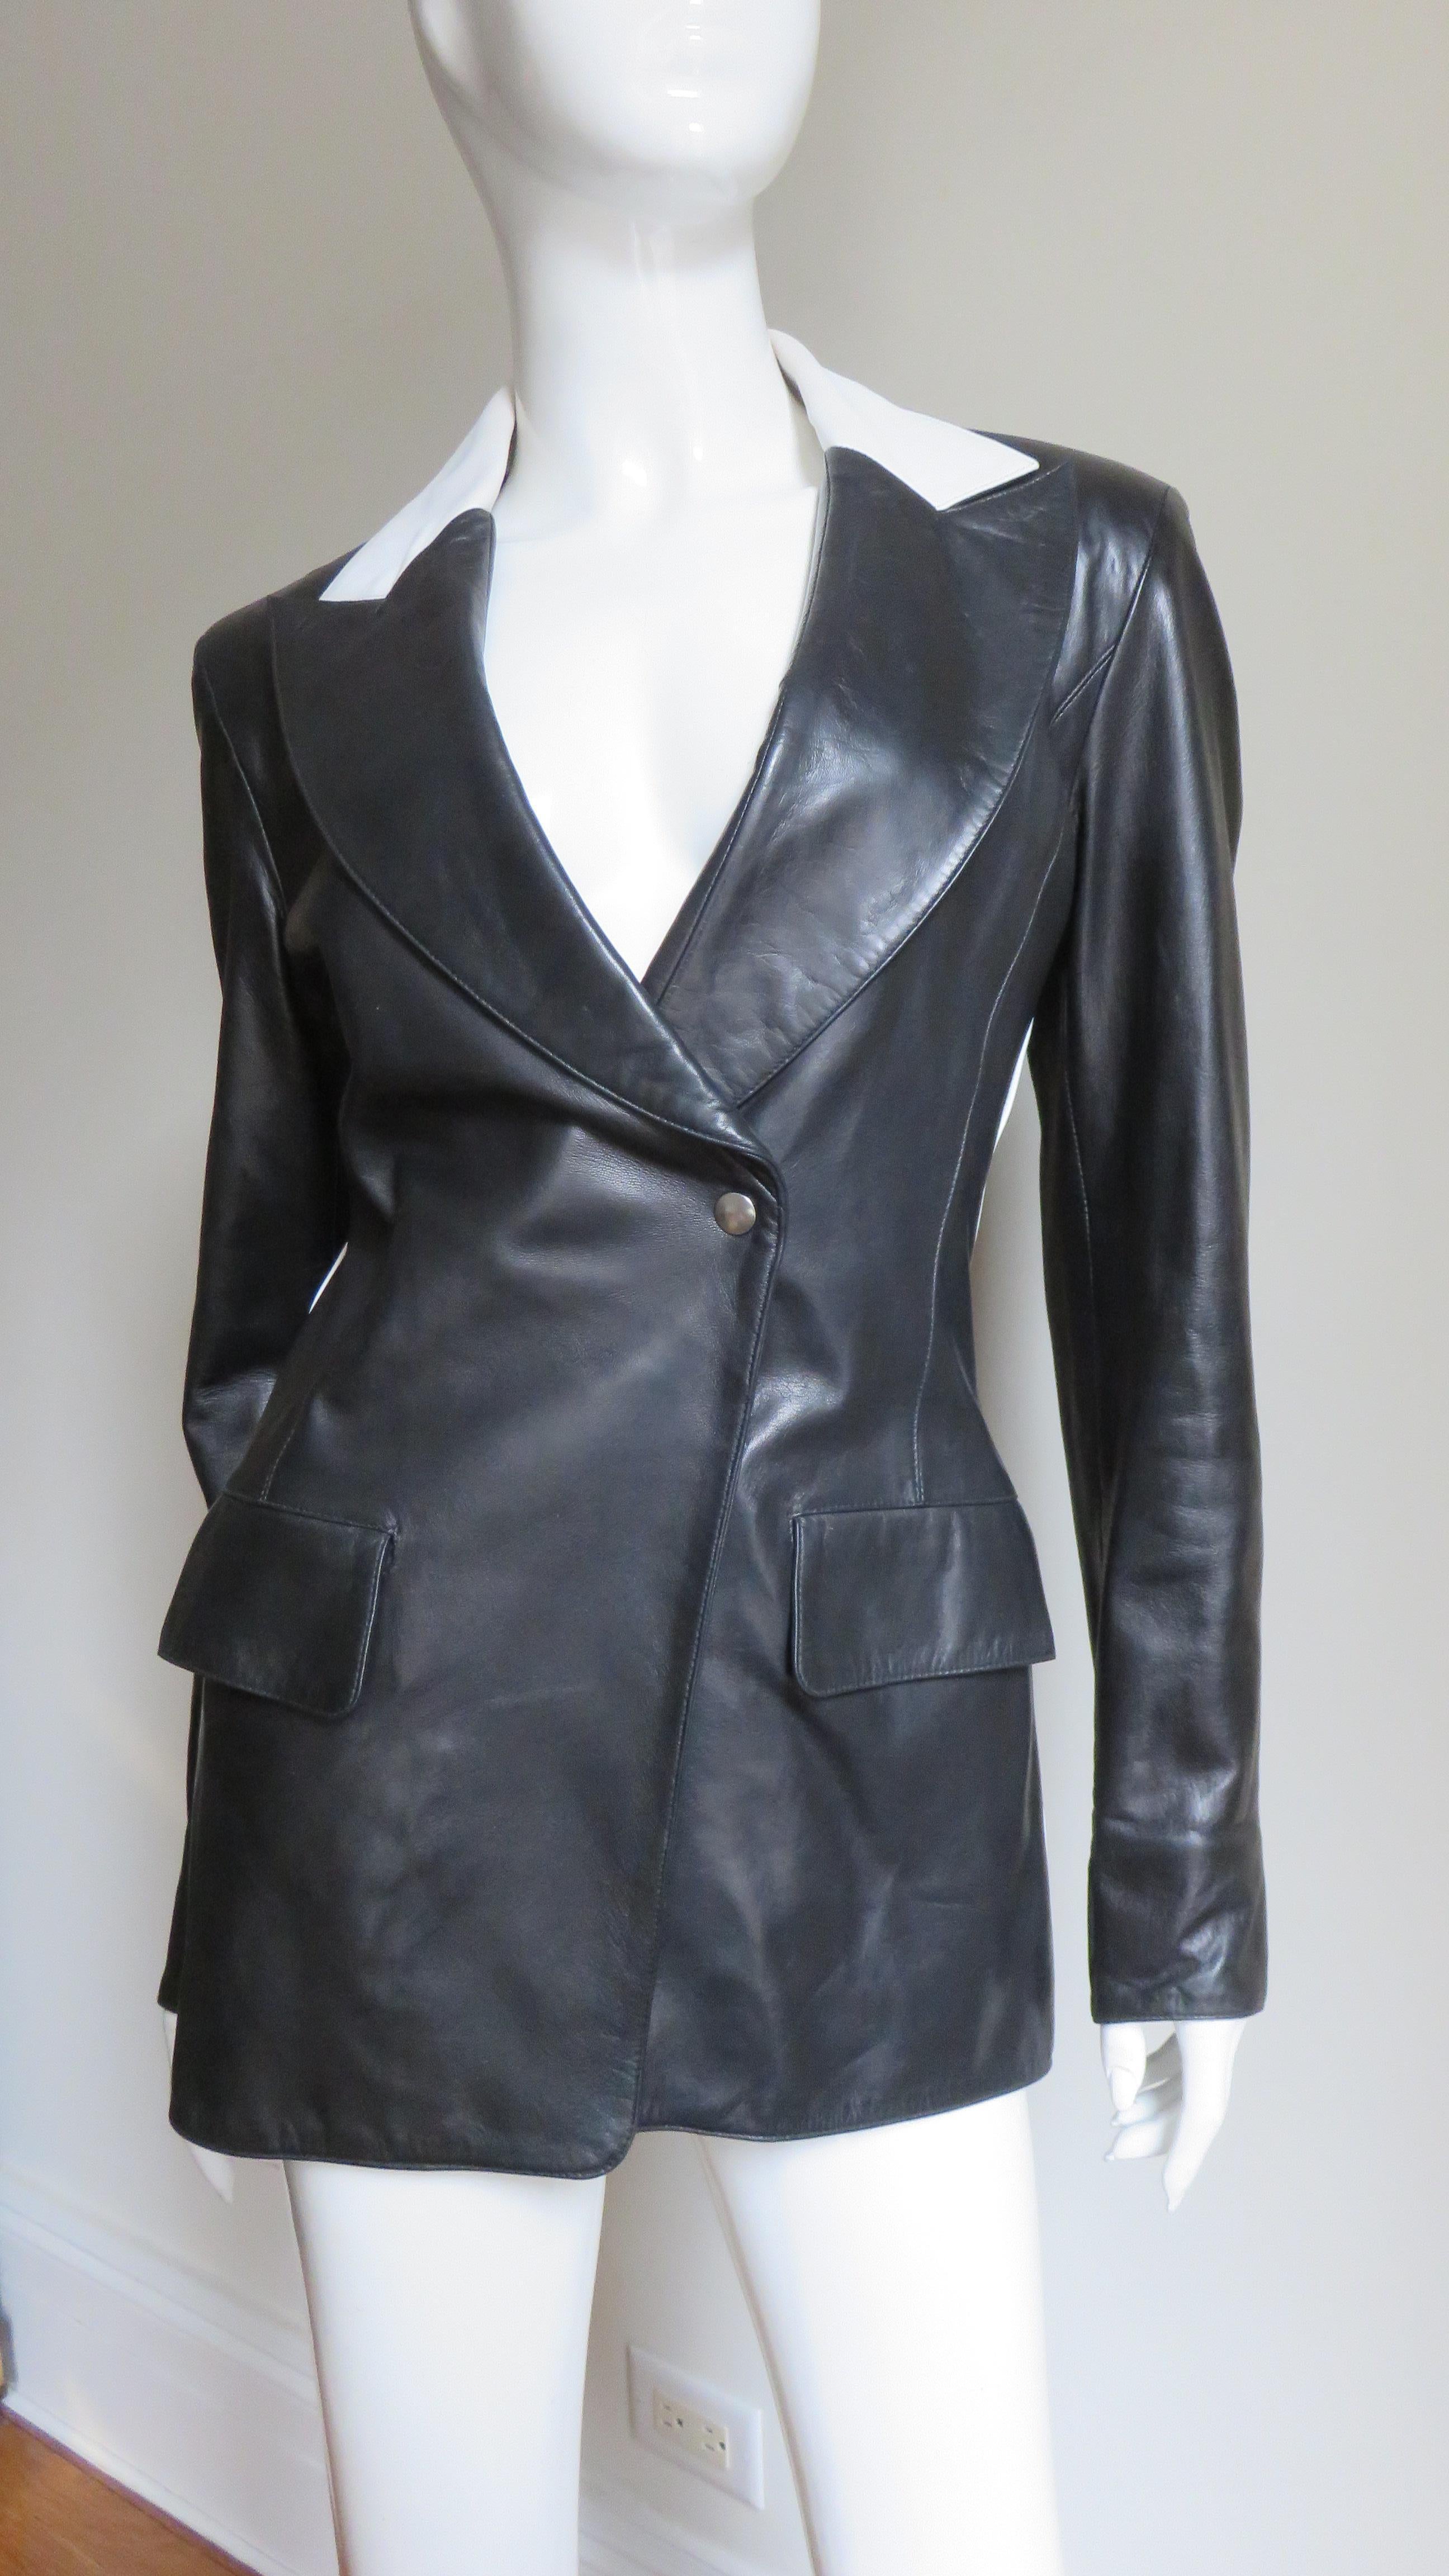 A gorgeous black and white leather jacket by Claude Montana.   It has 1/2 white 1/2 black leather lapel collar, long sleeves with zippers at the wrists and 2 front flap pockets. The back is cut in vertical panels the seams highlighted with white